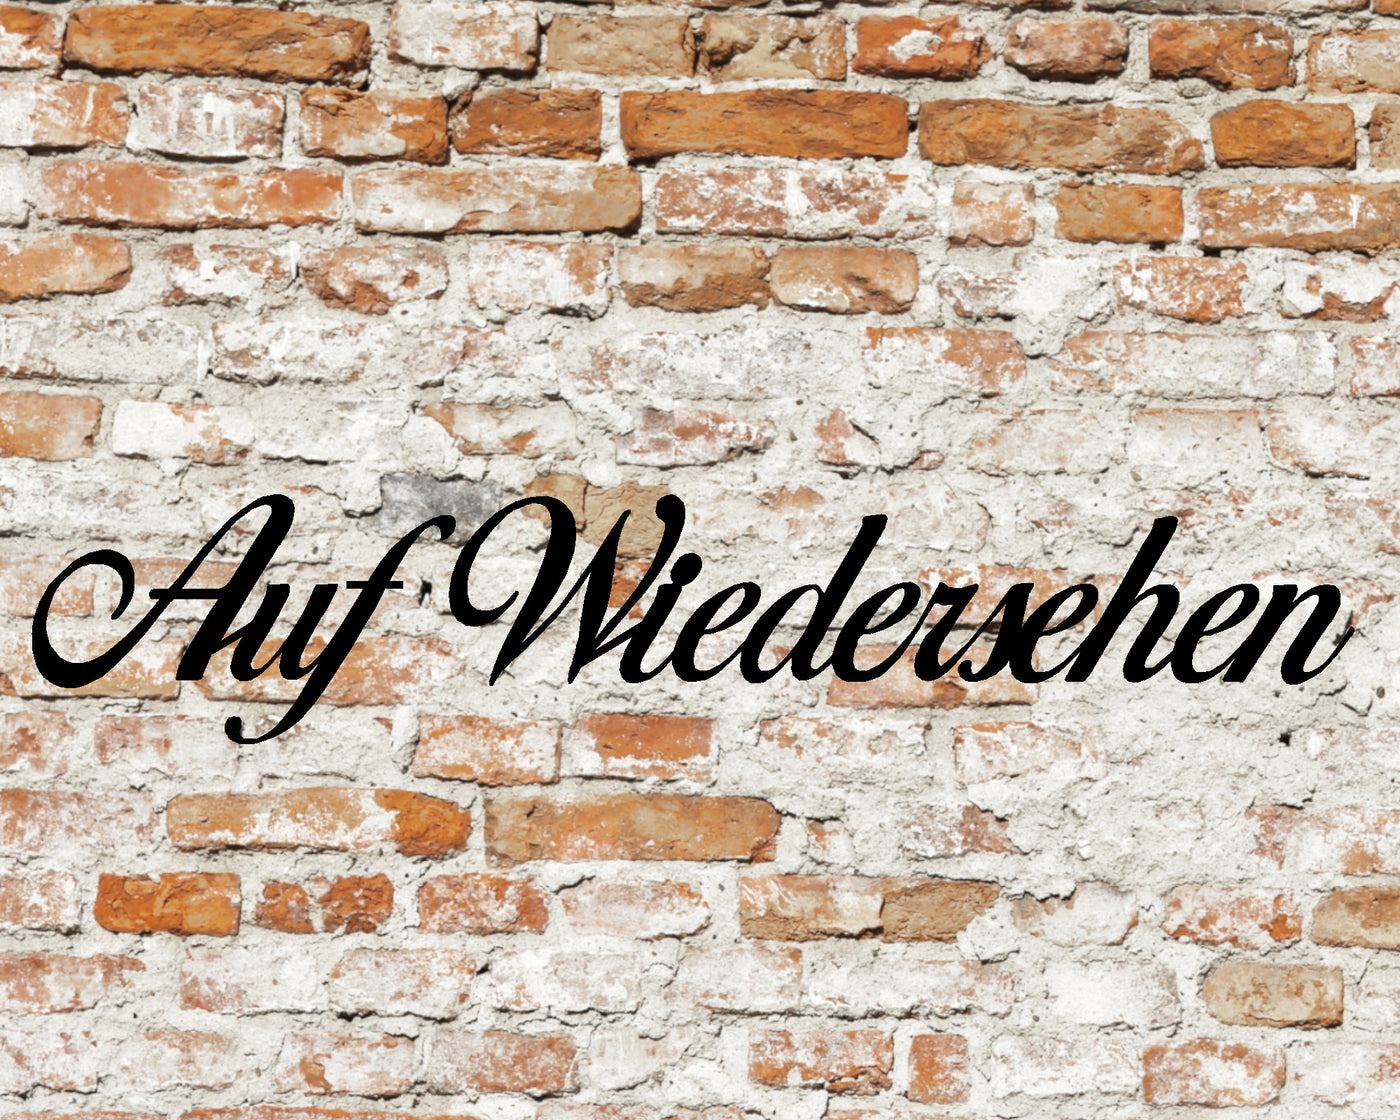 Auf Wiedershehen Metal Word Sign - Madison Iron and Wood - Wall Art - metal outdoor decor - Steel deocrations - american made products - veteran owned business products - fencing decorations - fencing supplies - custom wall decorations - personalized wall signs - steel - decorative post caps - steel post caps - metal post caps - brackets - structural brackets - home improvement - easter - easter decorations - easter gift - easter yard decor